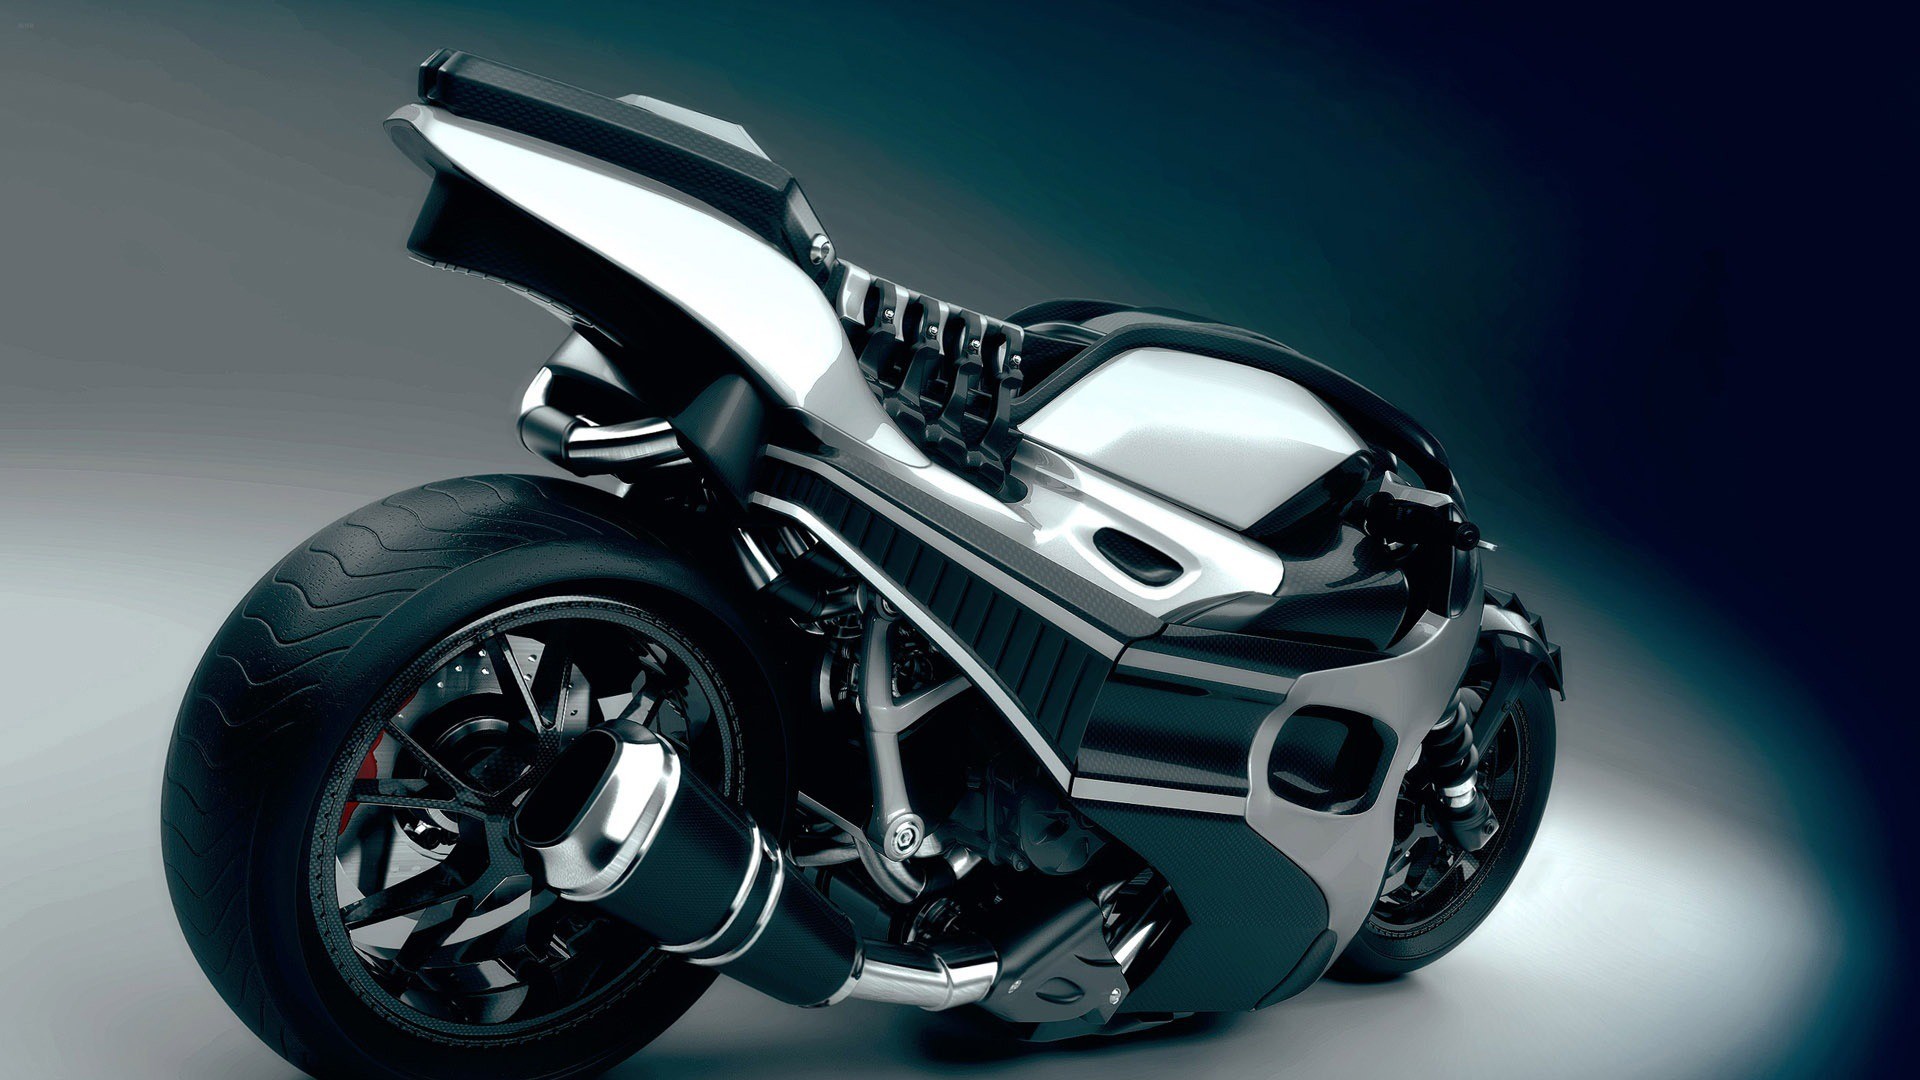 1920x1080 Cool Motorcycle Designs Background Hd Wallpapers Amagico px